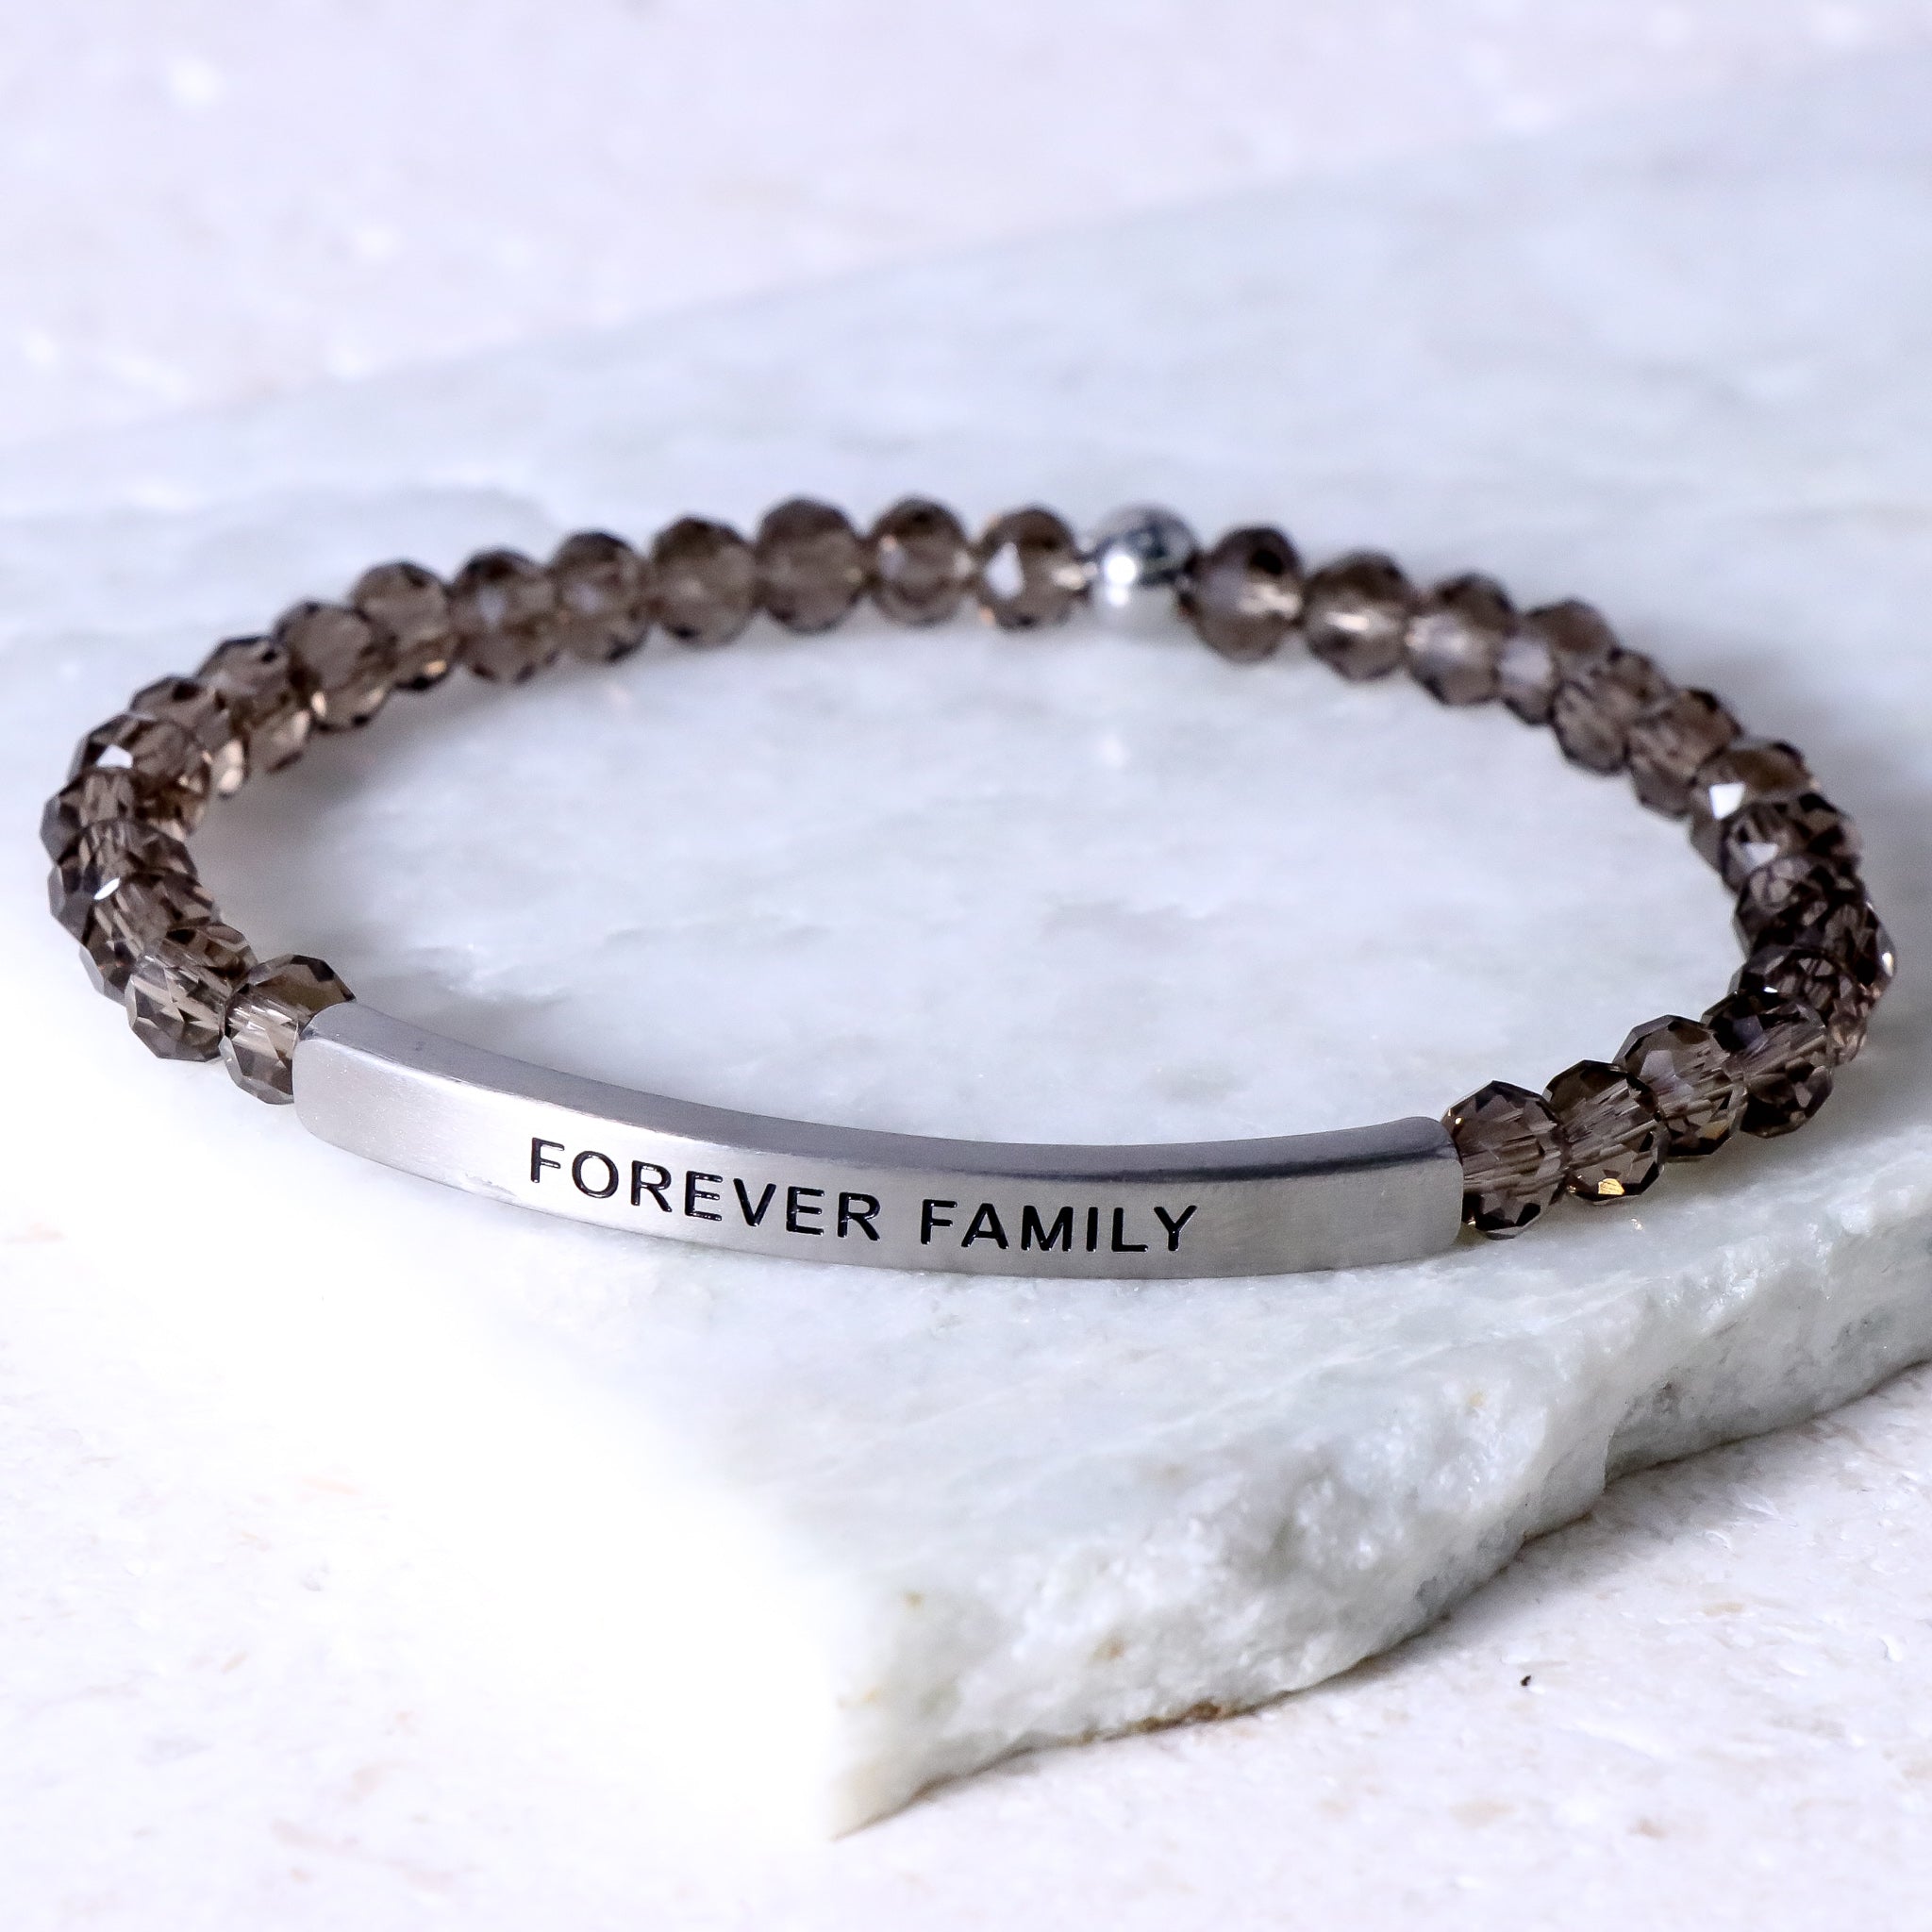 Family Gifts, Family Gift Ideas, Long Distance Gifts, Long Distance,  Matching Bracelets, Family Bracelet Set, Family Gifts, Back to School - Etsy